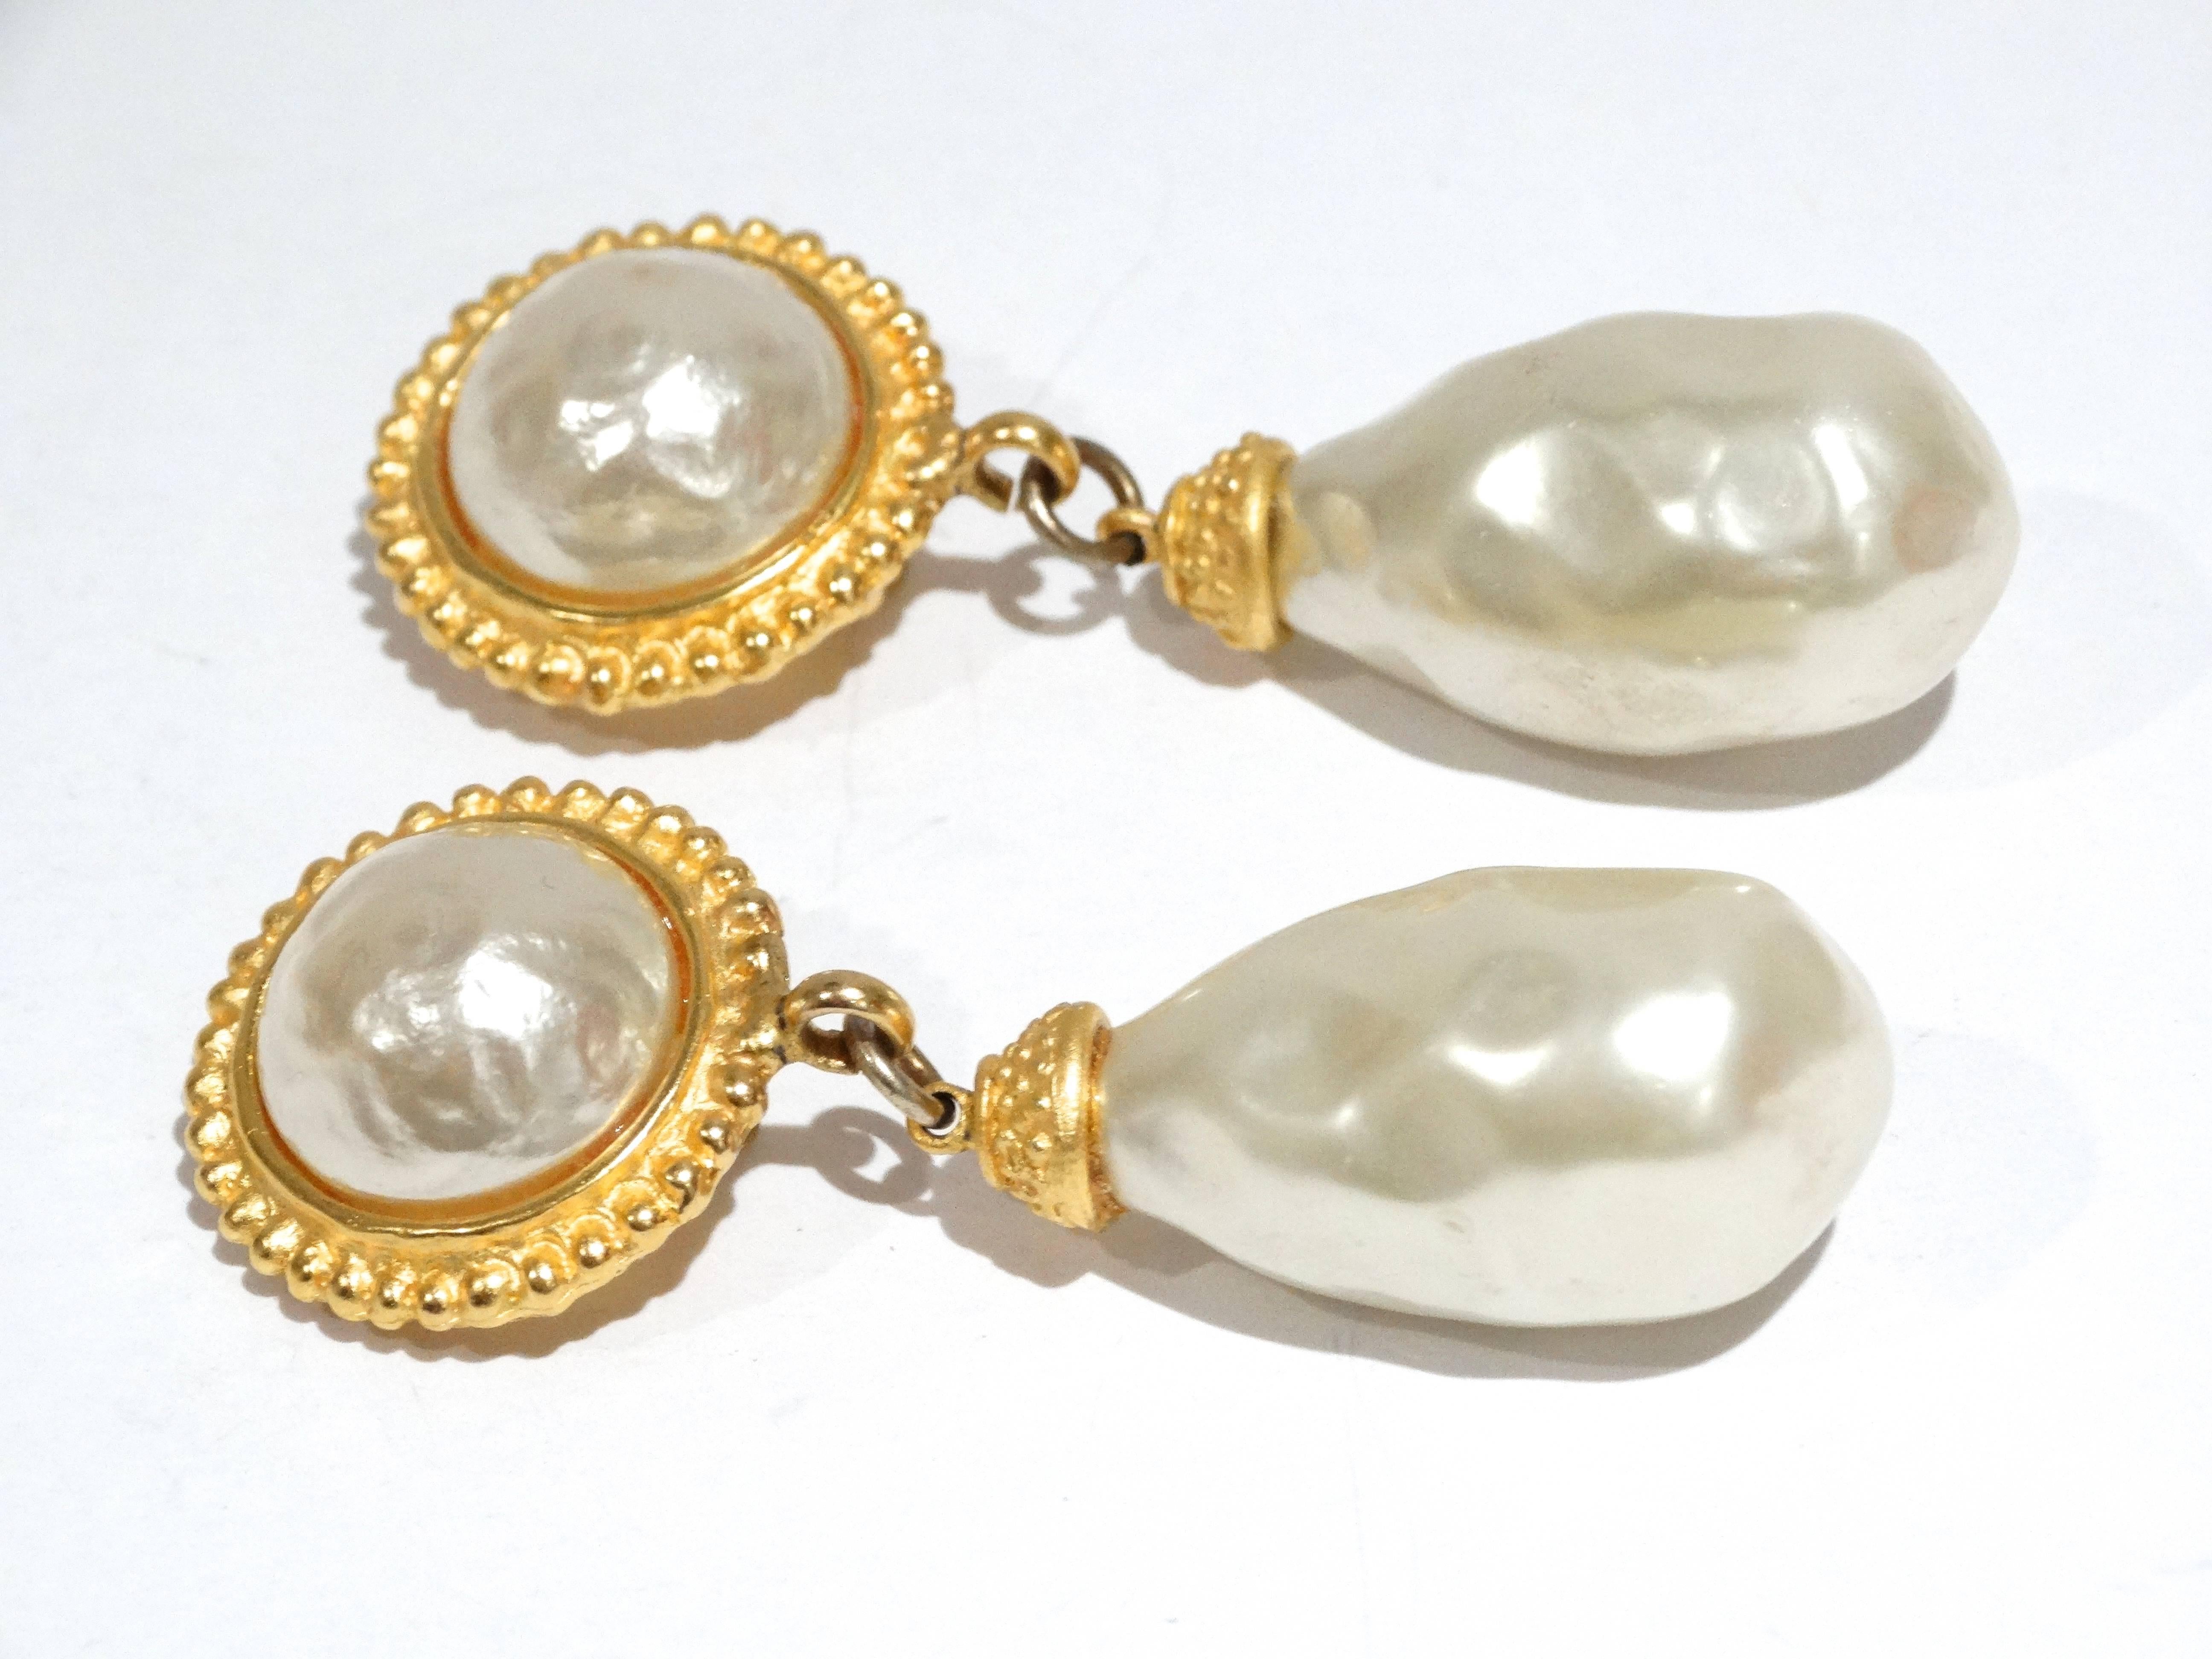 A fabulous pair of 1990's Deanna Hamro Gold Tone Faux Pearl Earrings

Deanna grew up at the beach in Southern California, embarking on a modeling career at an early age leading her to live abroad and travel the globe.

3